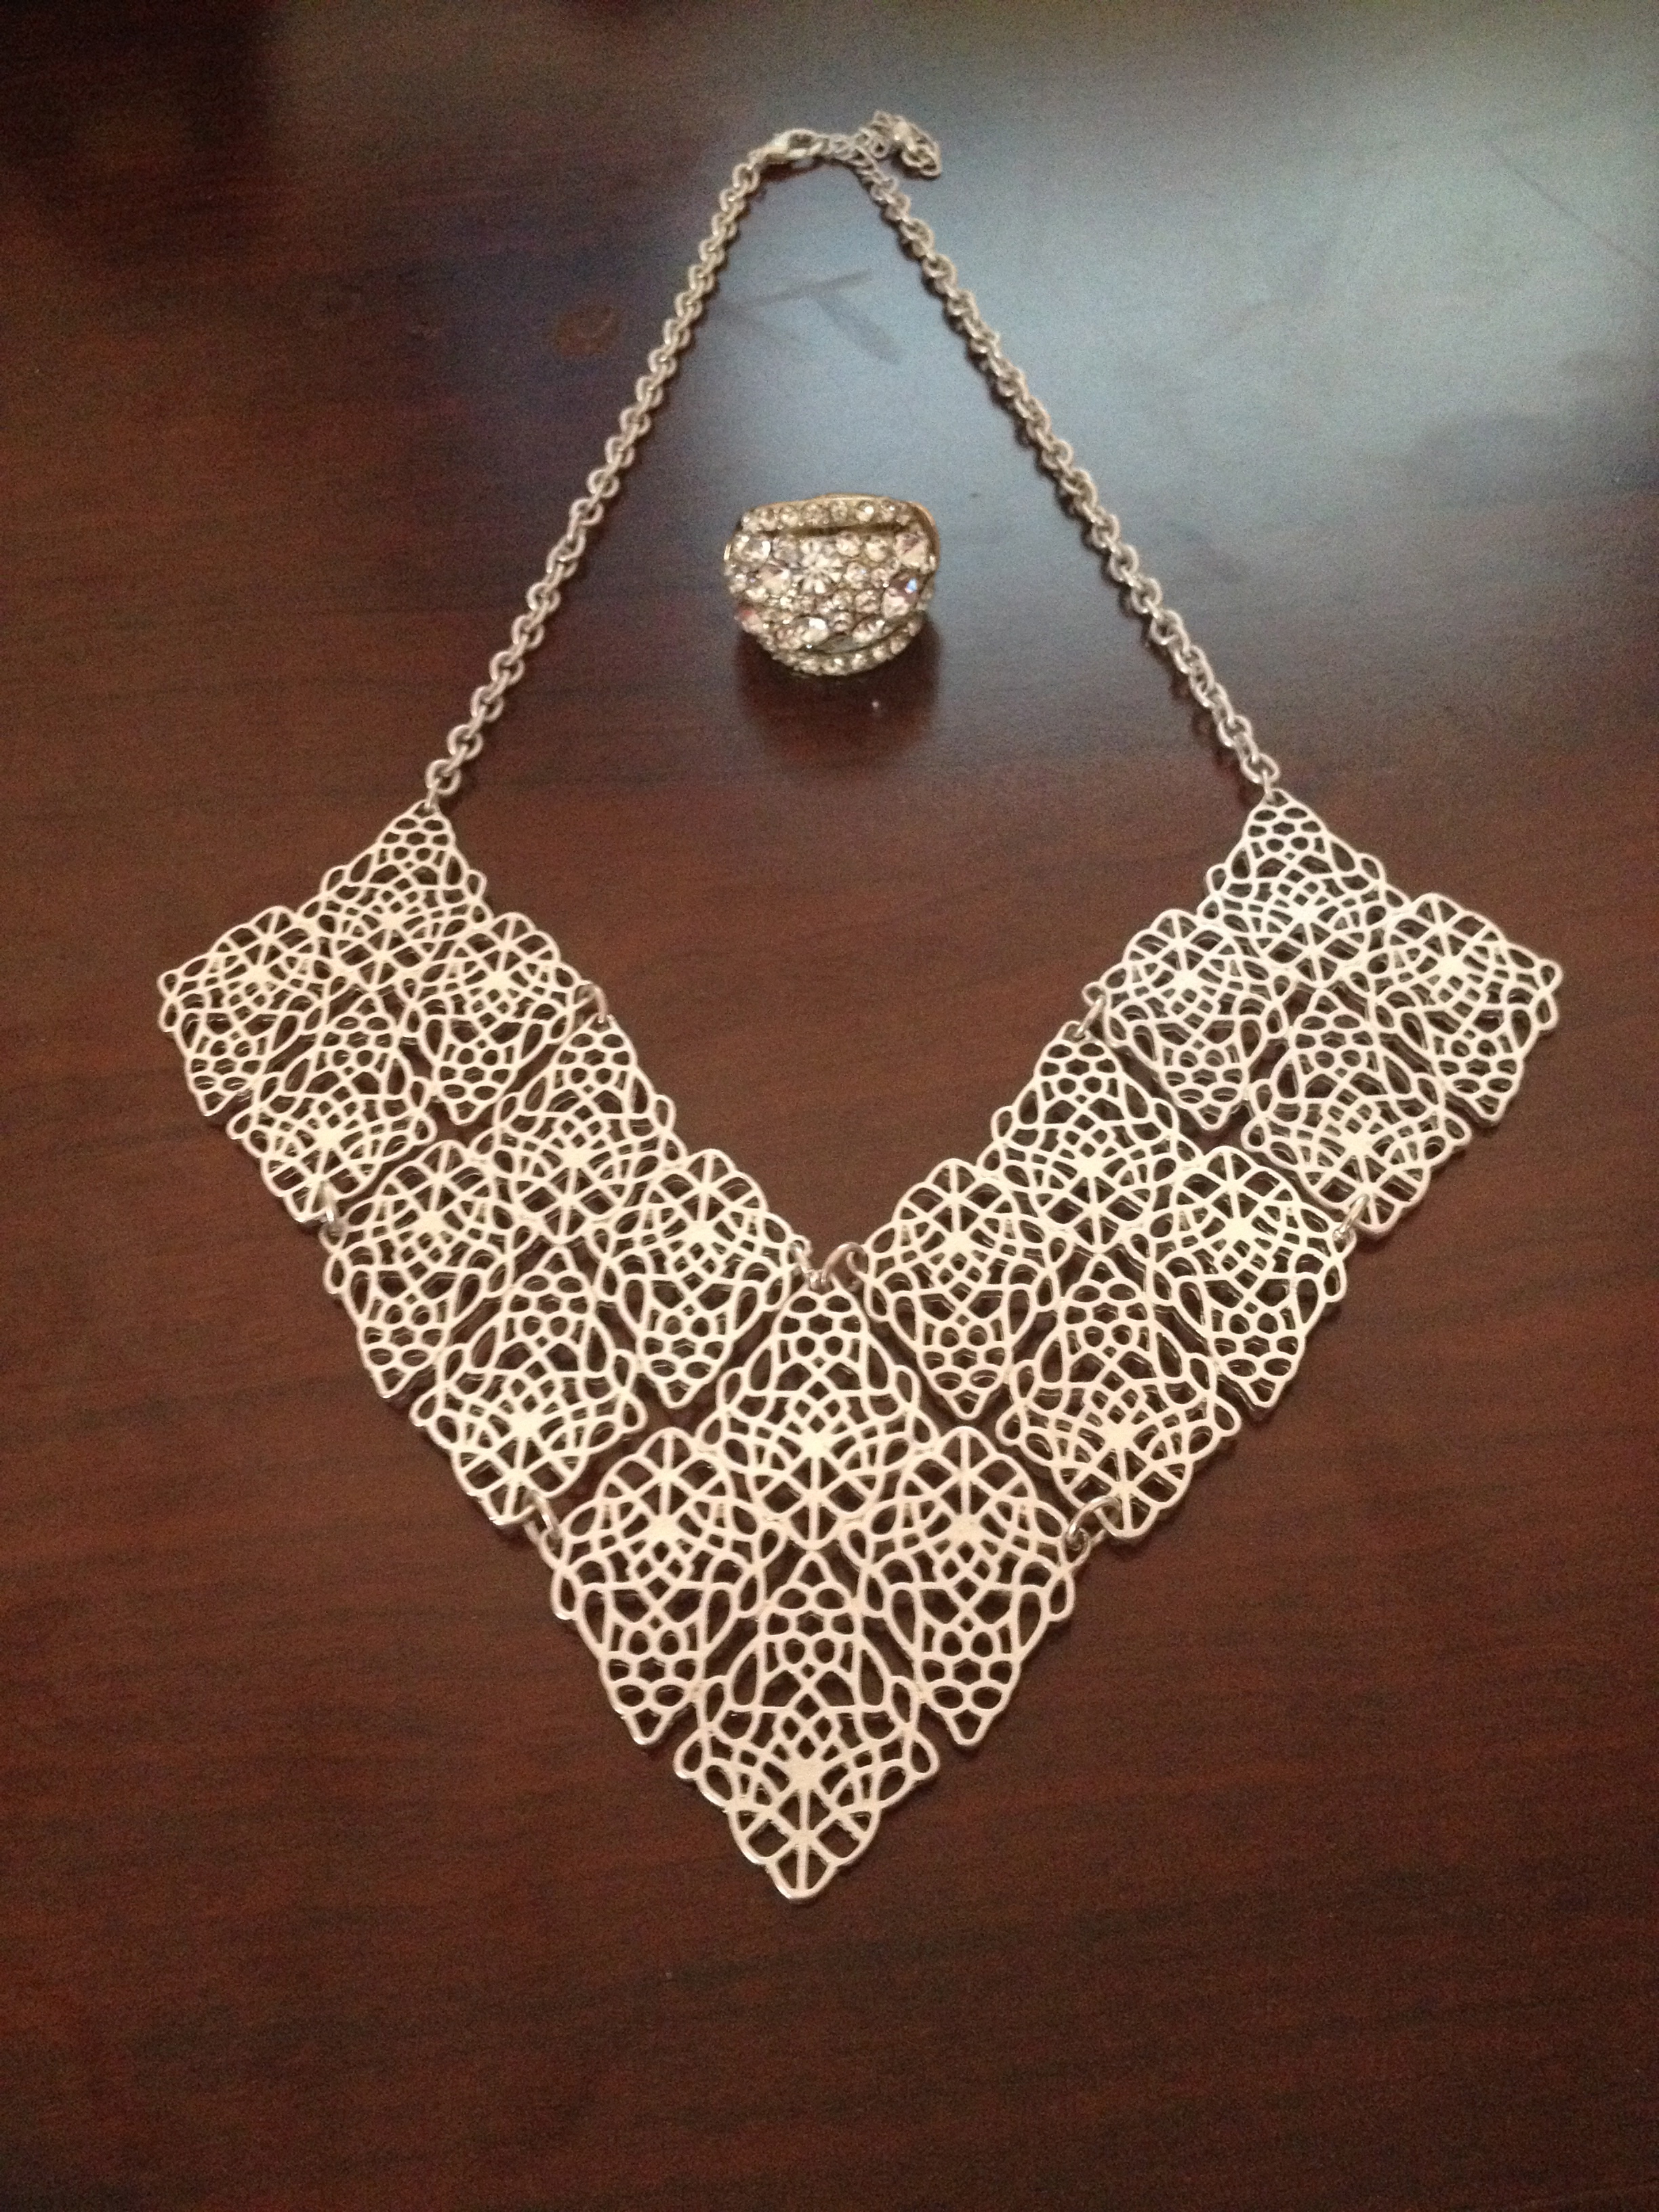 Gift Necklace Wantable Review Accessories